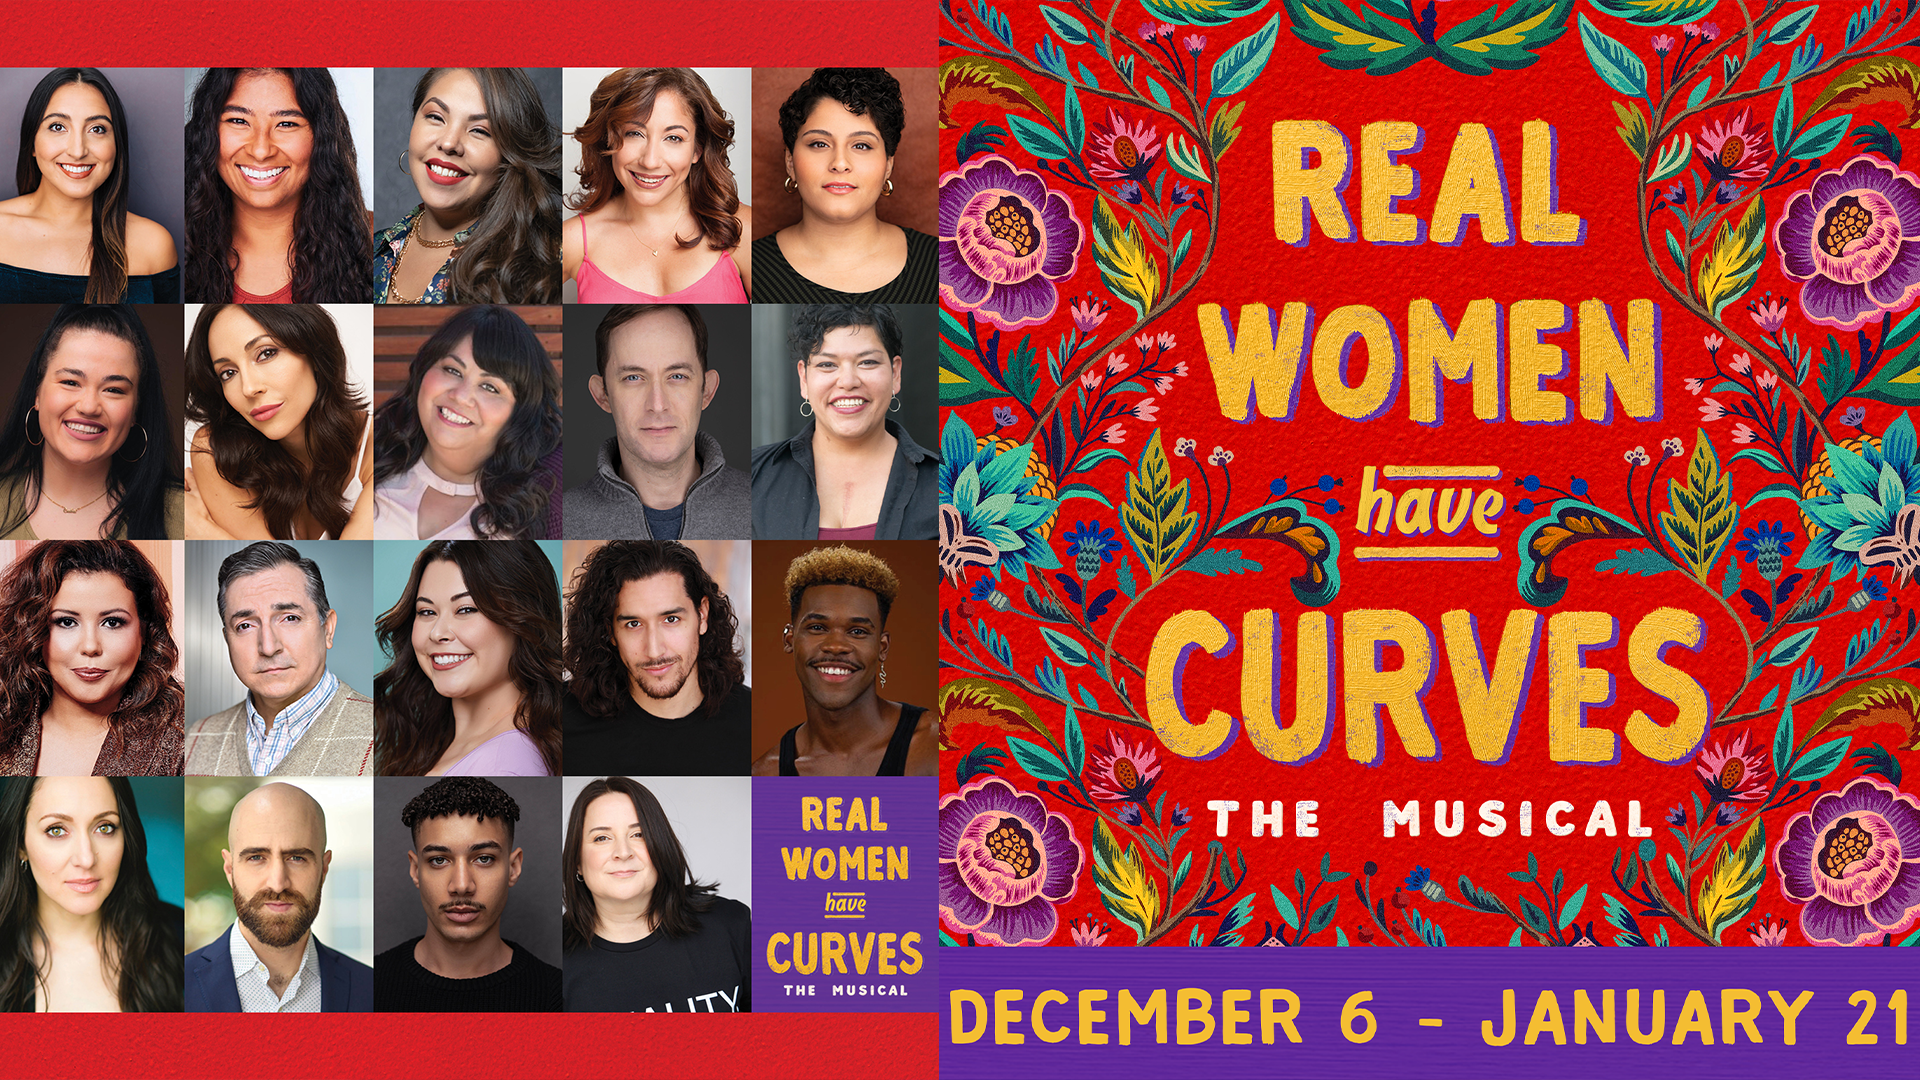 Real Women Have Curves' will be adapted into a musical